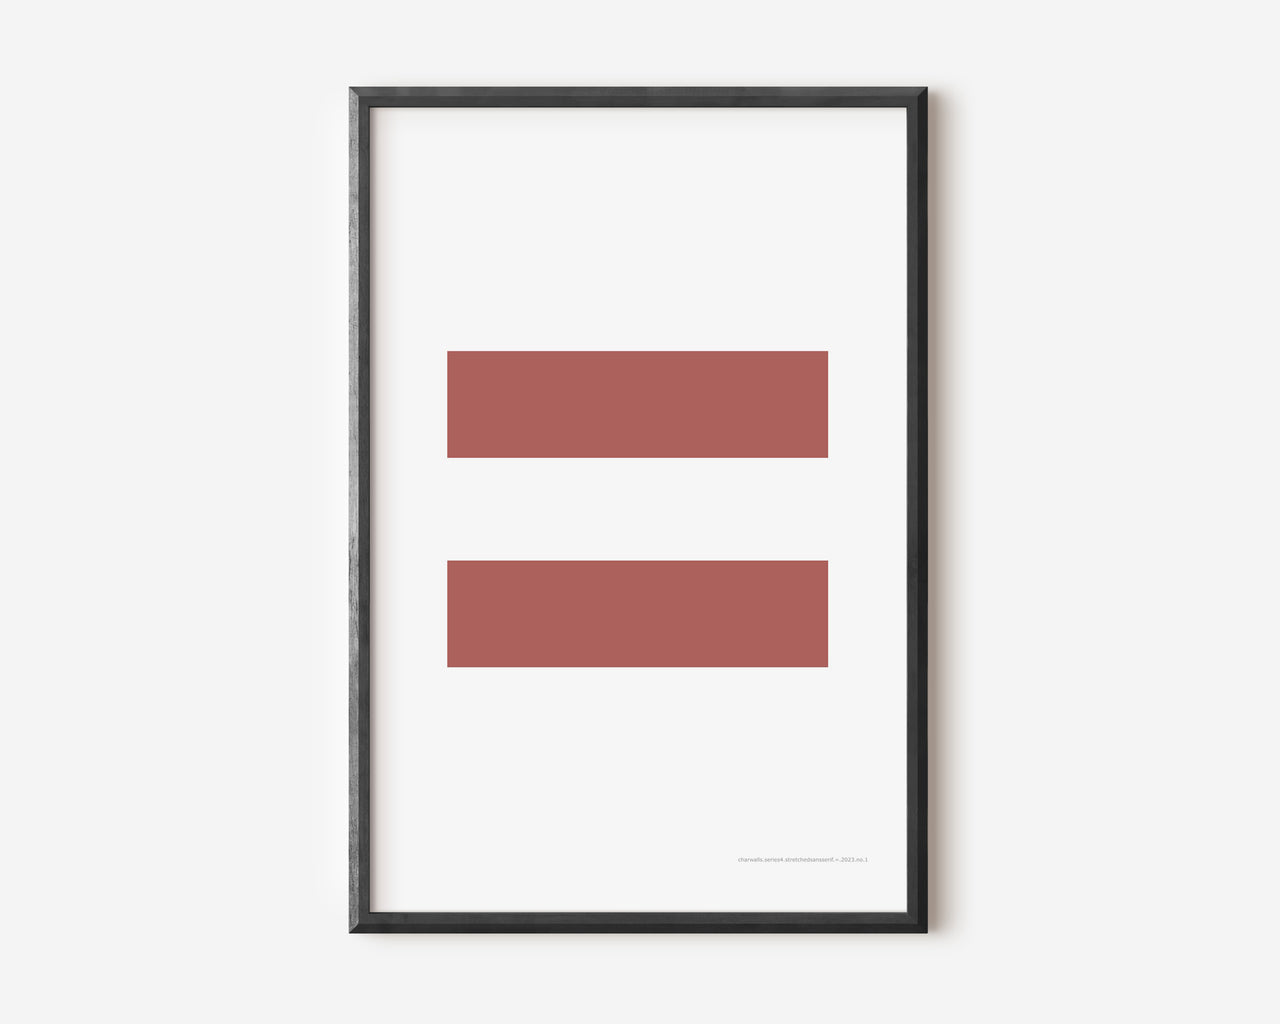 Modern symbol art print with a Nantucket red equals sign on a white background.